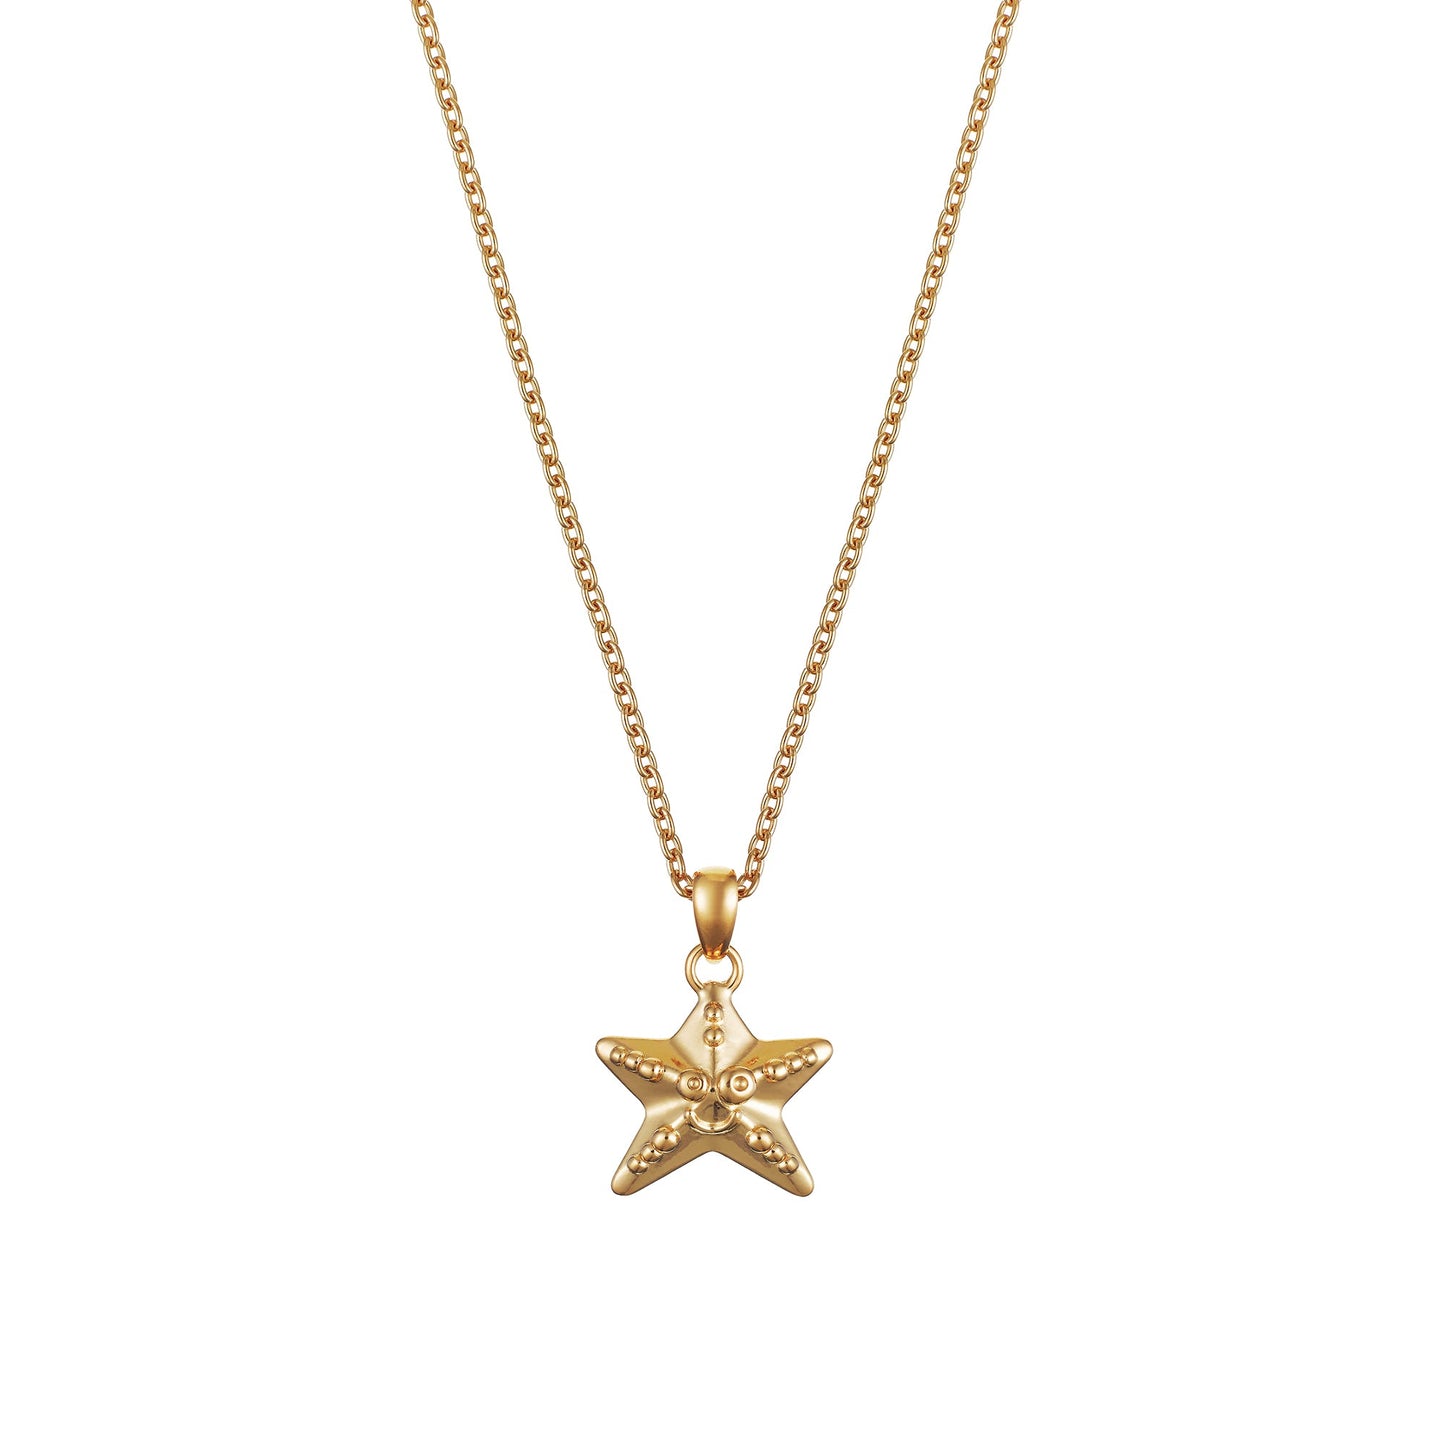 Children's Gold Starfish with Smile Pendant on an Extendable Chain Necklace